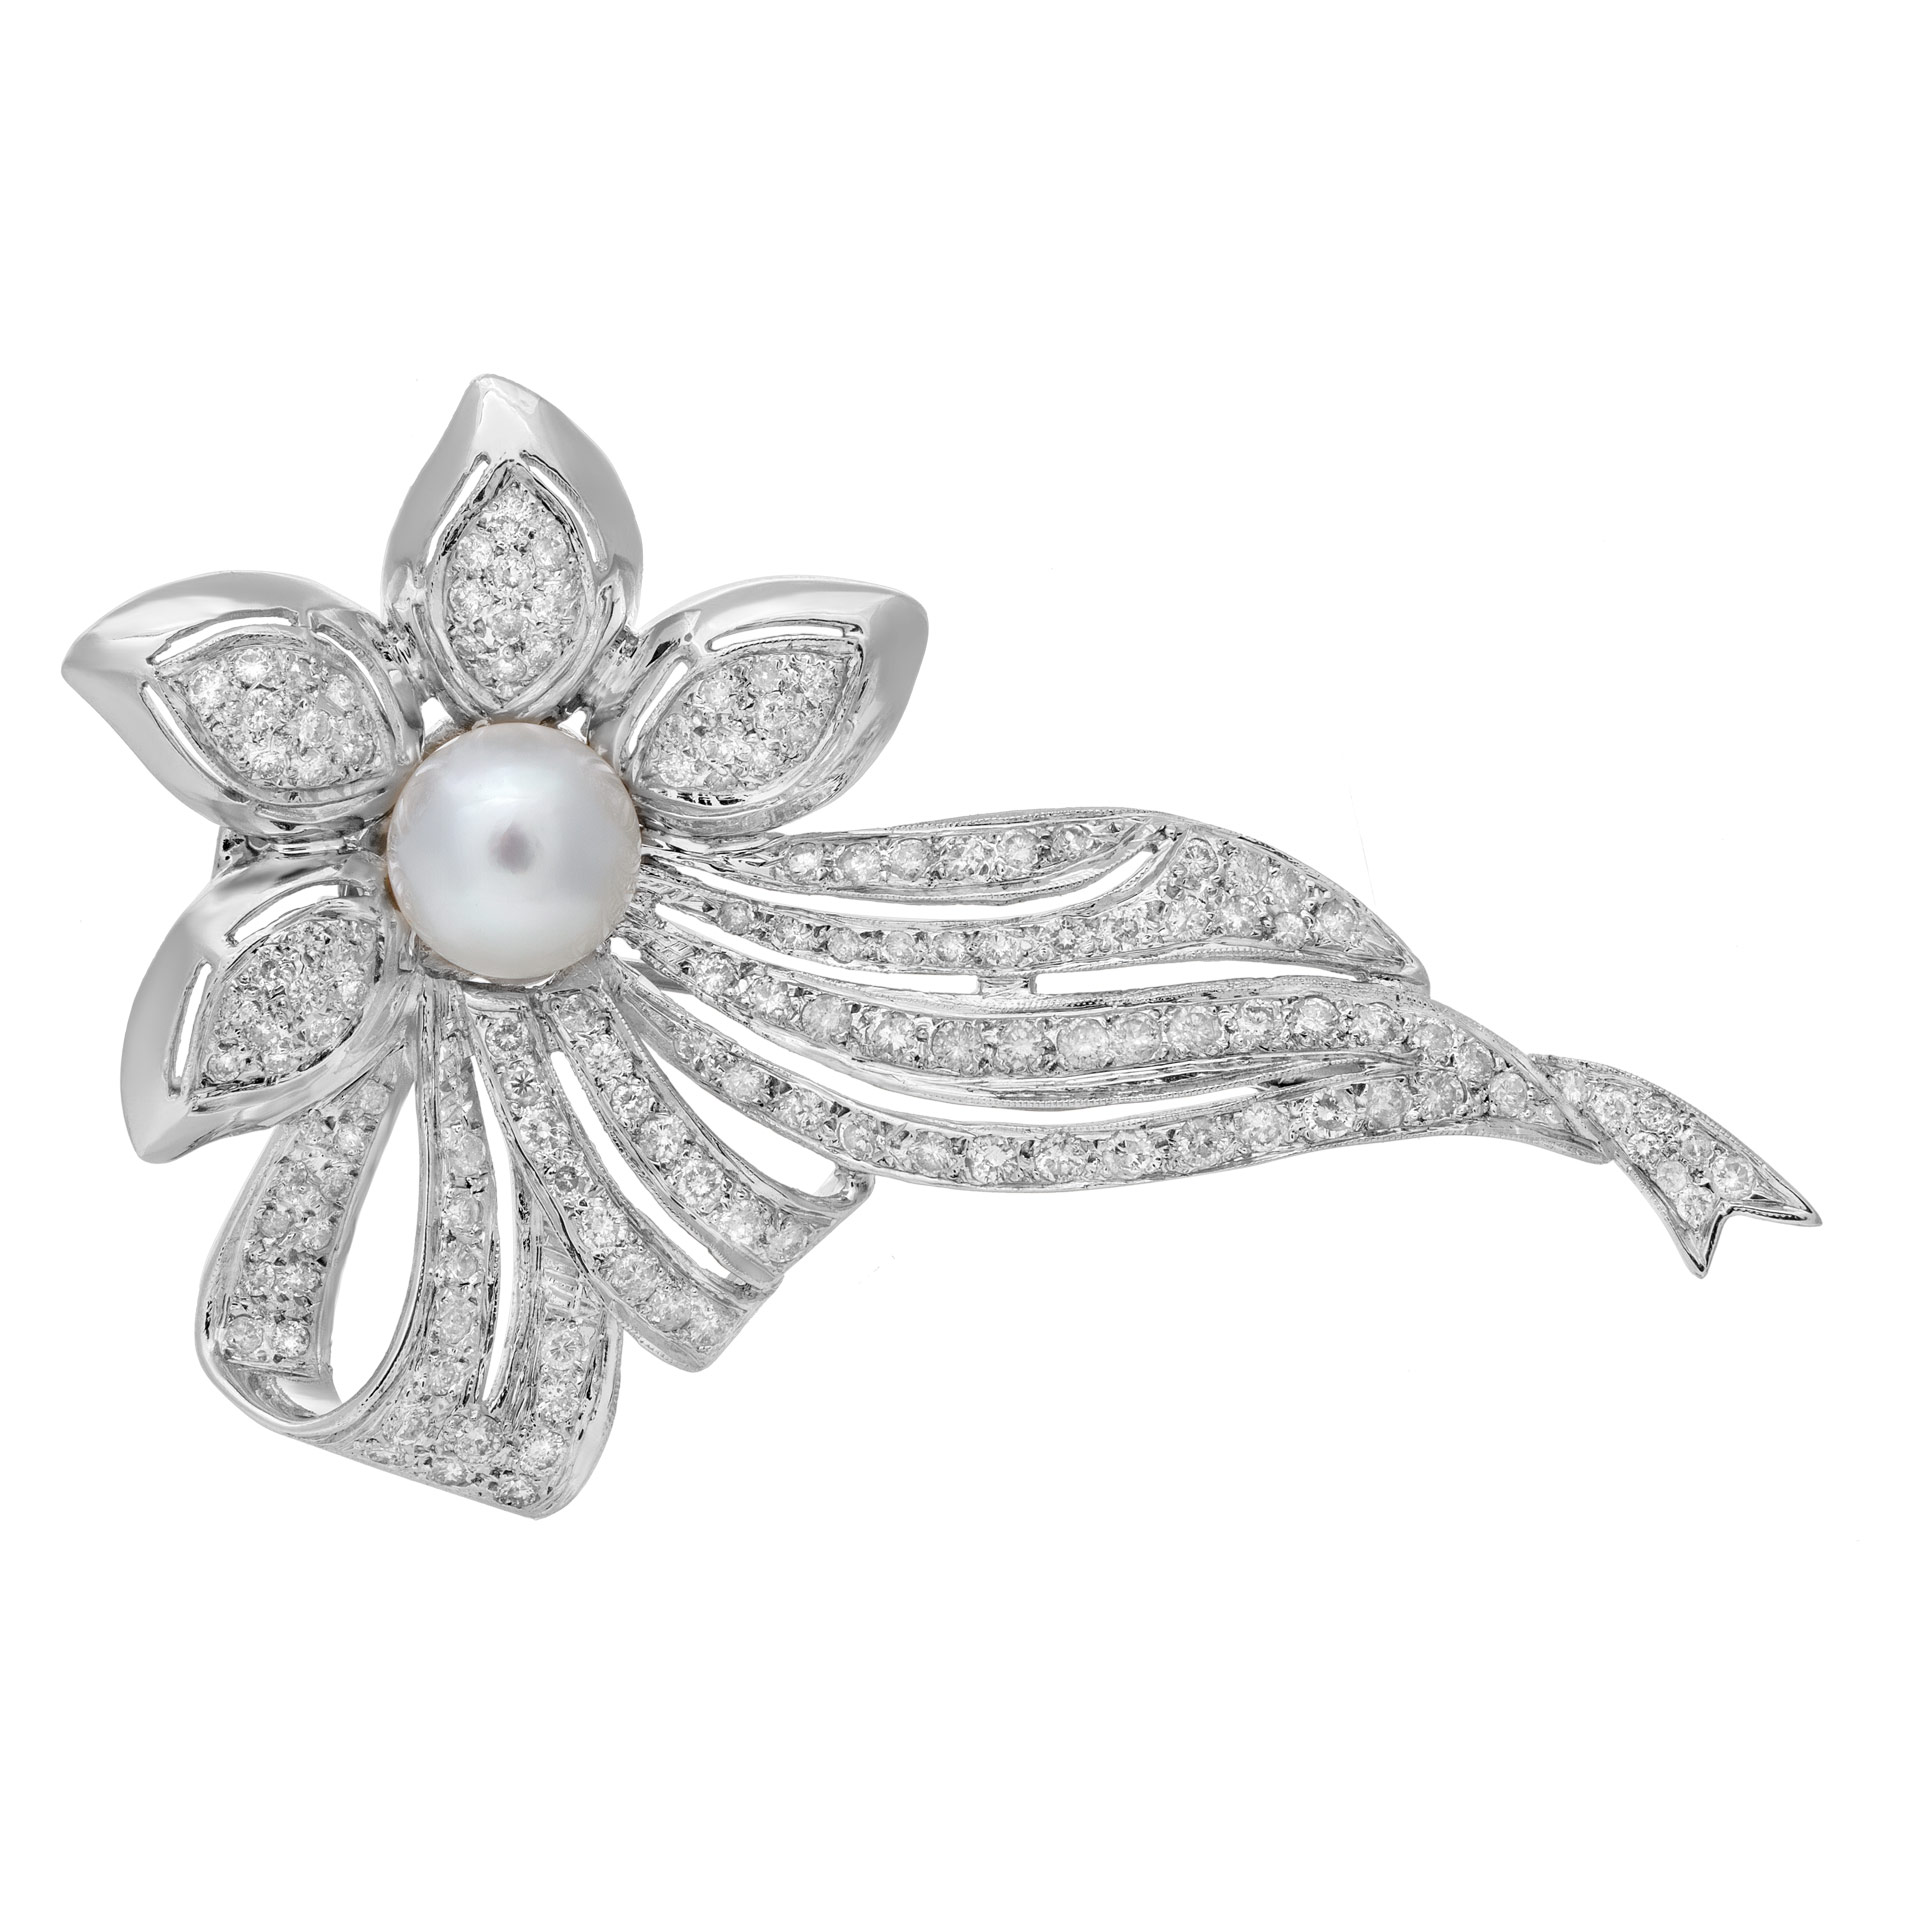 South Sea pearl, slightly off round (10 x10.5mm) & over 2.70 carats diamonds flower brooch set in 18K white gold. image 1